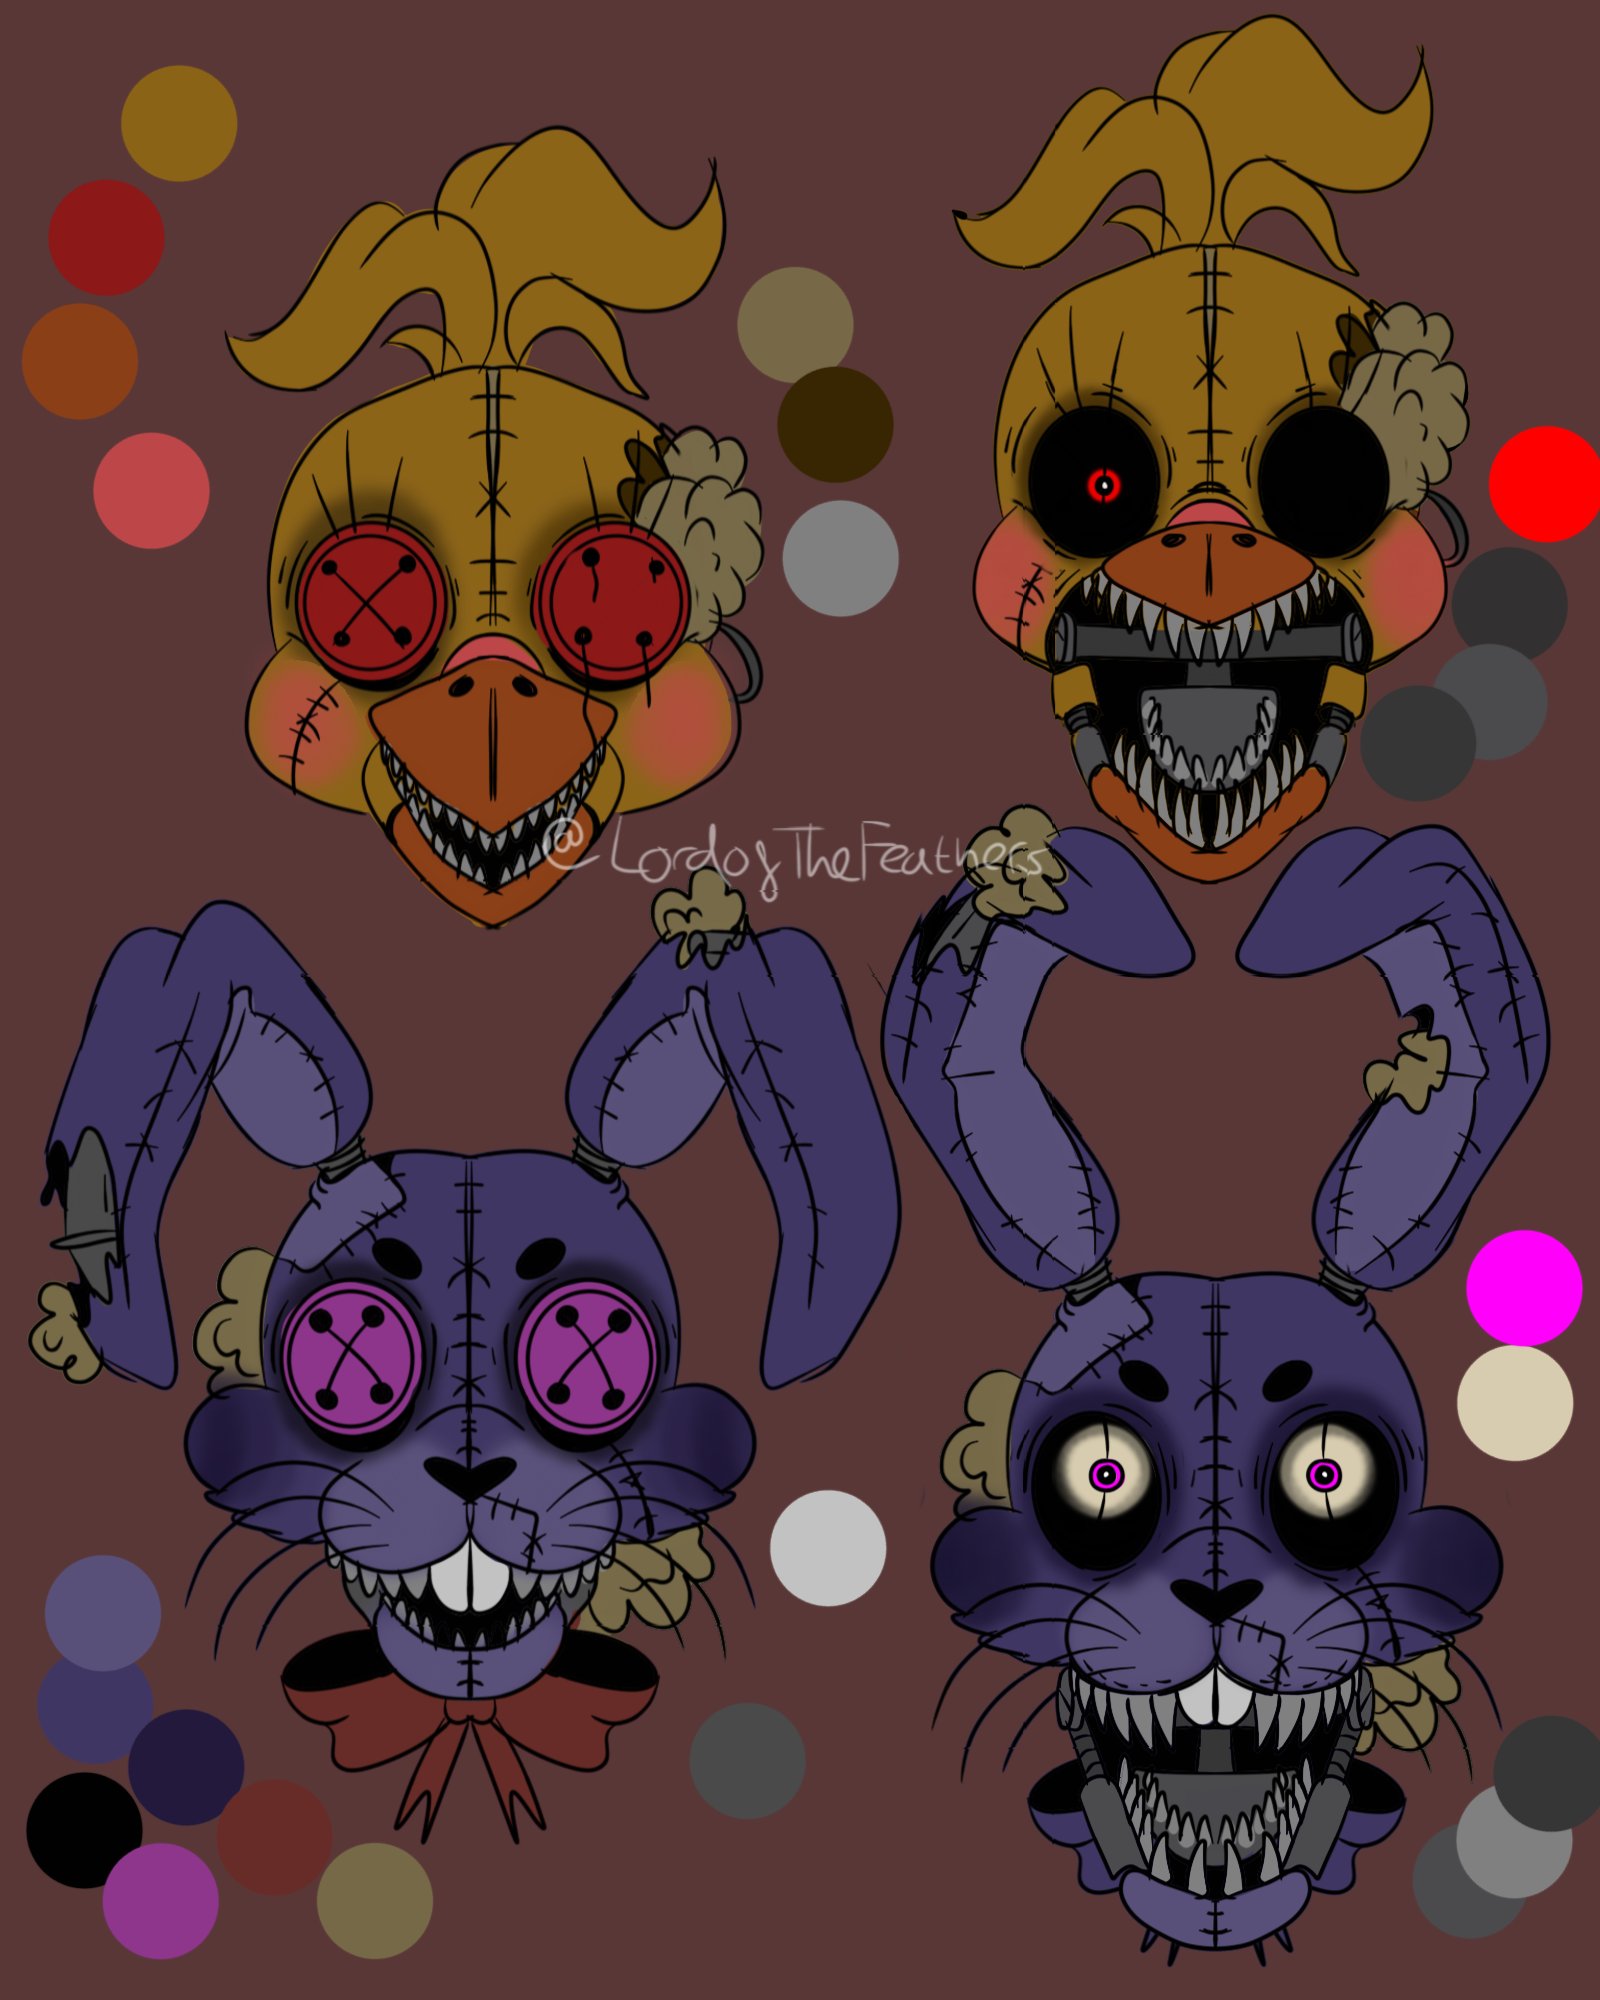 LordOfTheFeathers on X: Teddy-bear style fnaf 4 (So, I was stumped on how  I was gonna do the fnaf 4 animatronics. I went with the idea of making them  like vintage teddy-bears